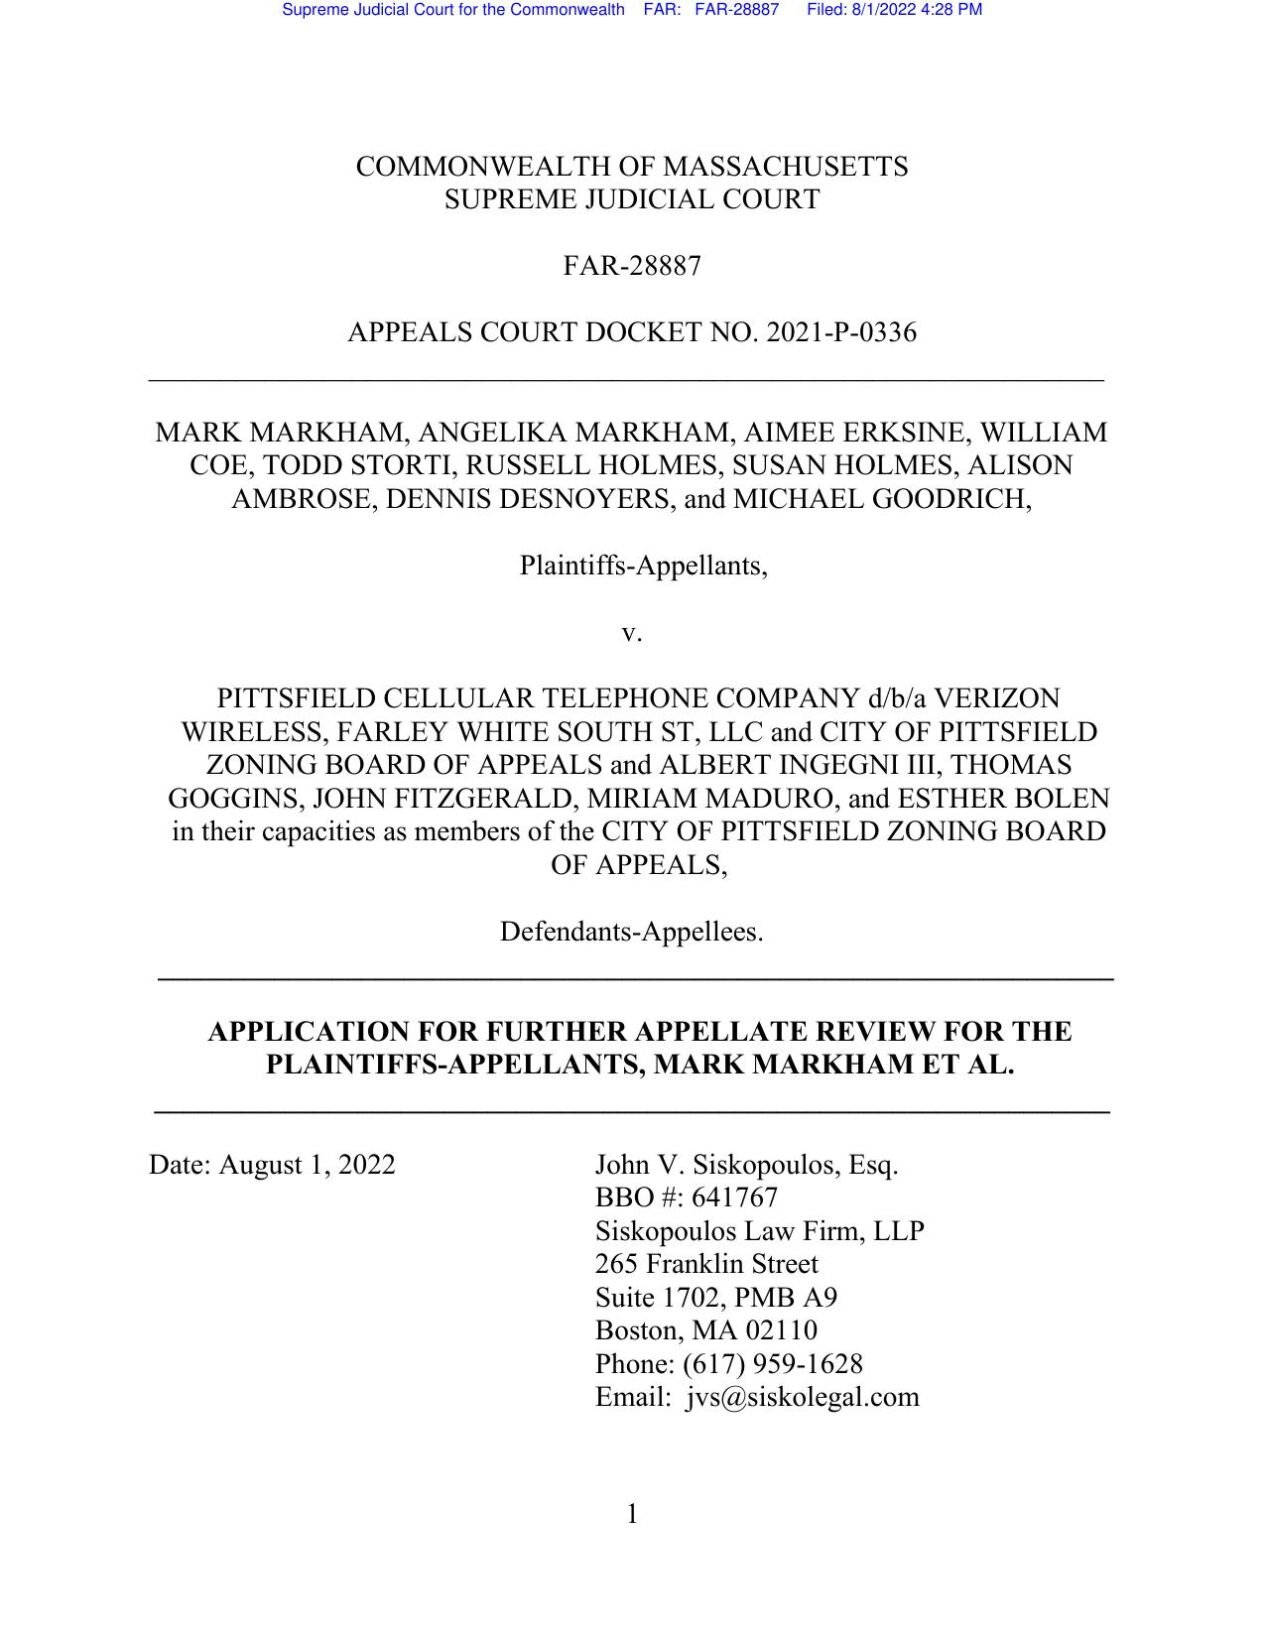 Verizon cell tower abutters file petition for Supreme Judicial Court to review their case